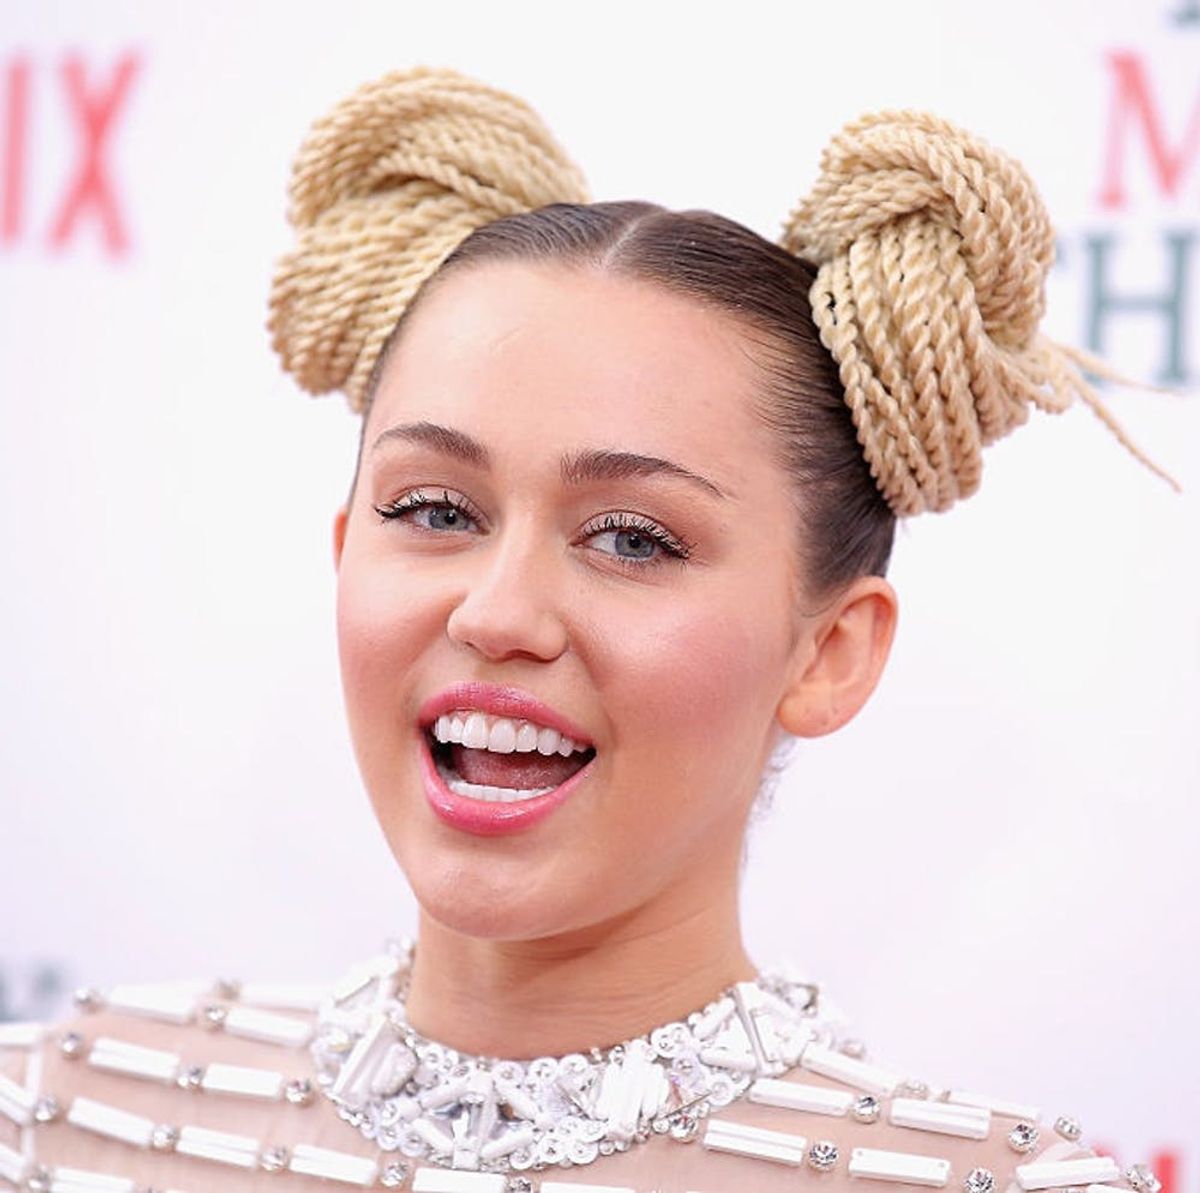 Miley Cyrus Just Owned Jimmy Fallon in a Funny Face Off